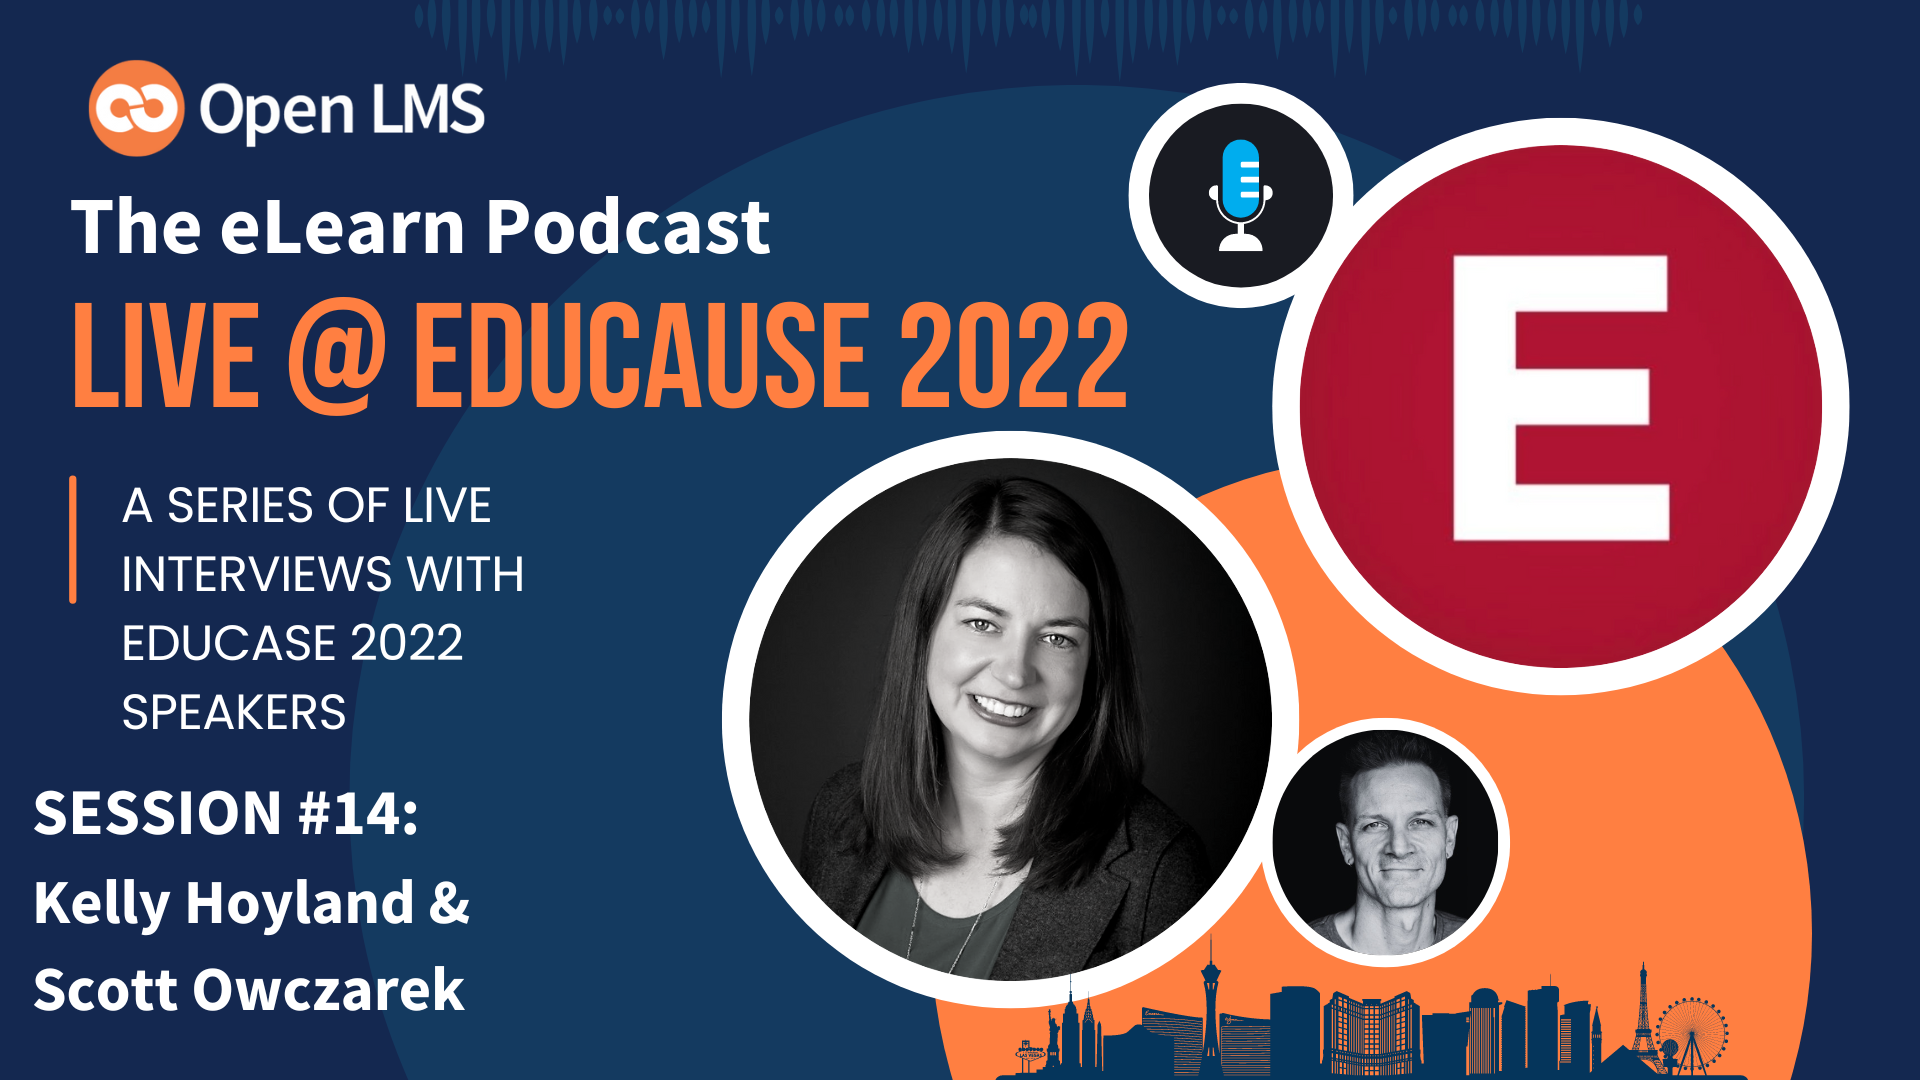 eLearn Podcast Page 2023